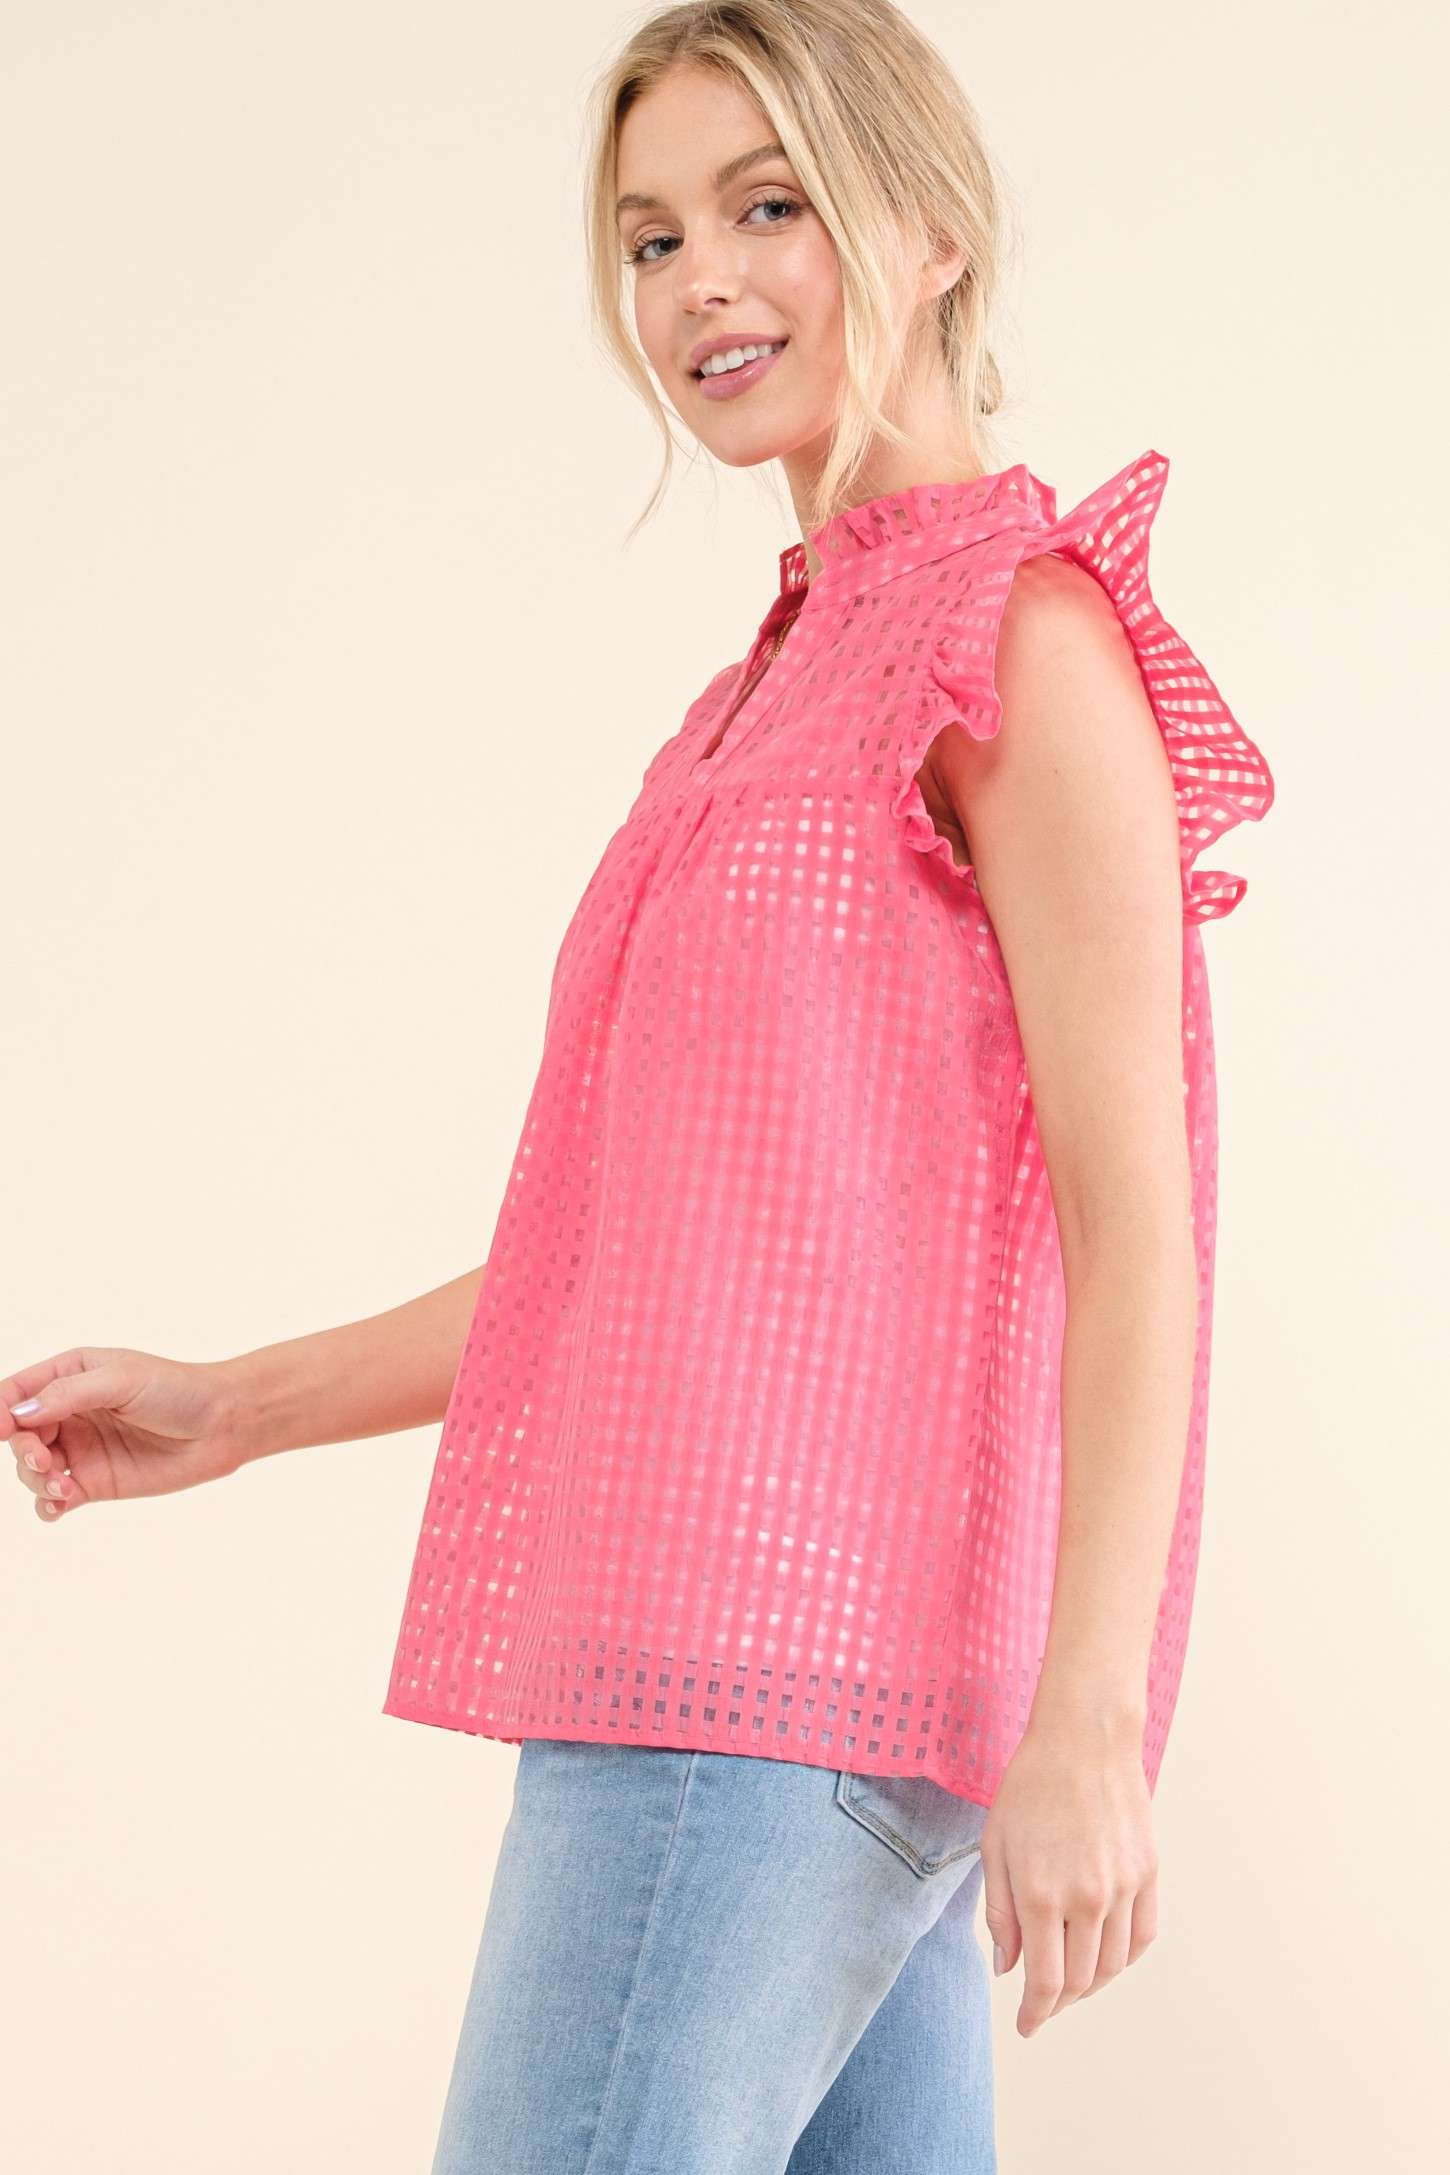 Sheer Gridded Baby Doll Ruffled Top - Pink